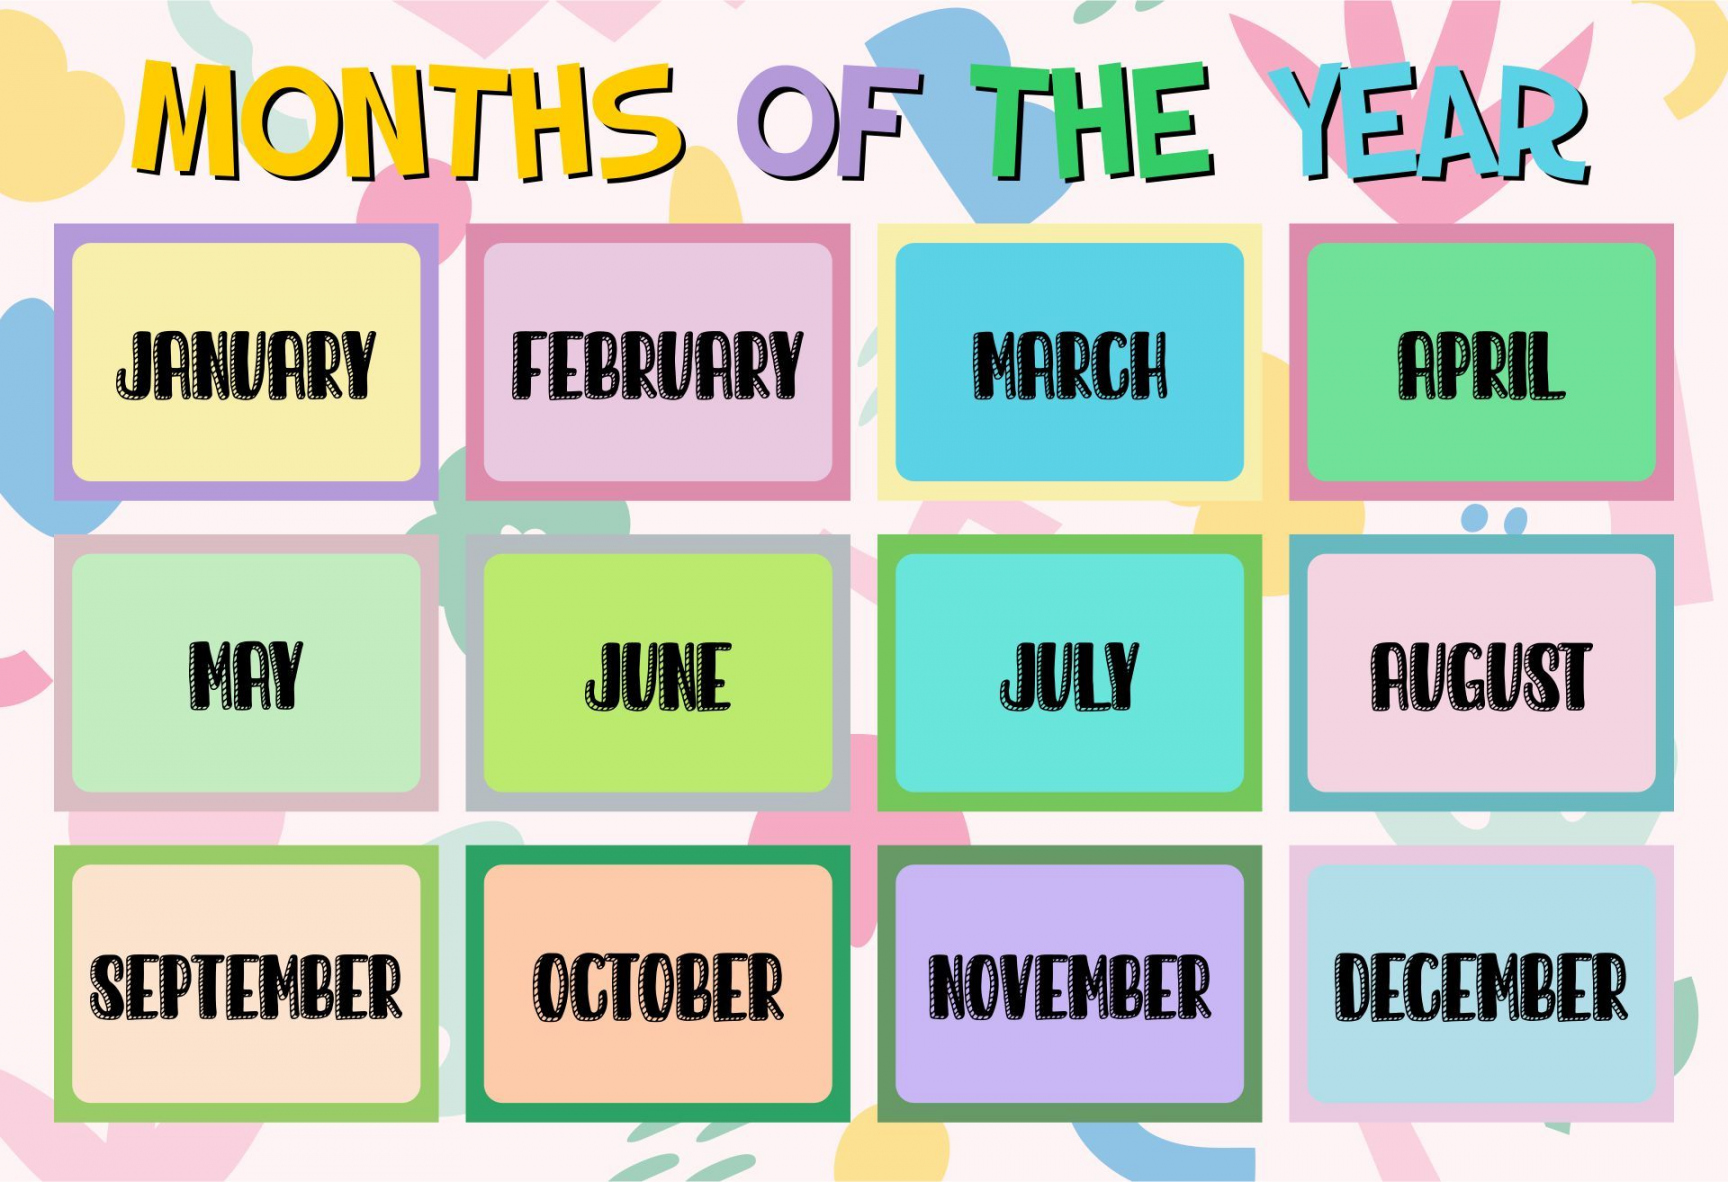 Free Printable Months Of The Year Flashcards  Months in a year  - FREE Printables - Free Printable Months Of The Year